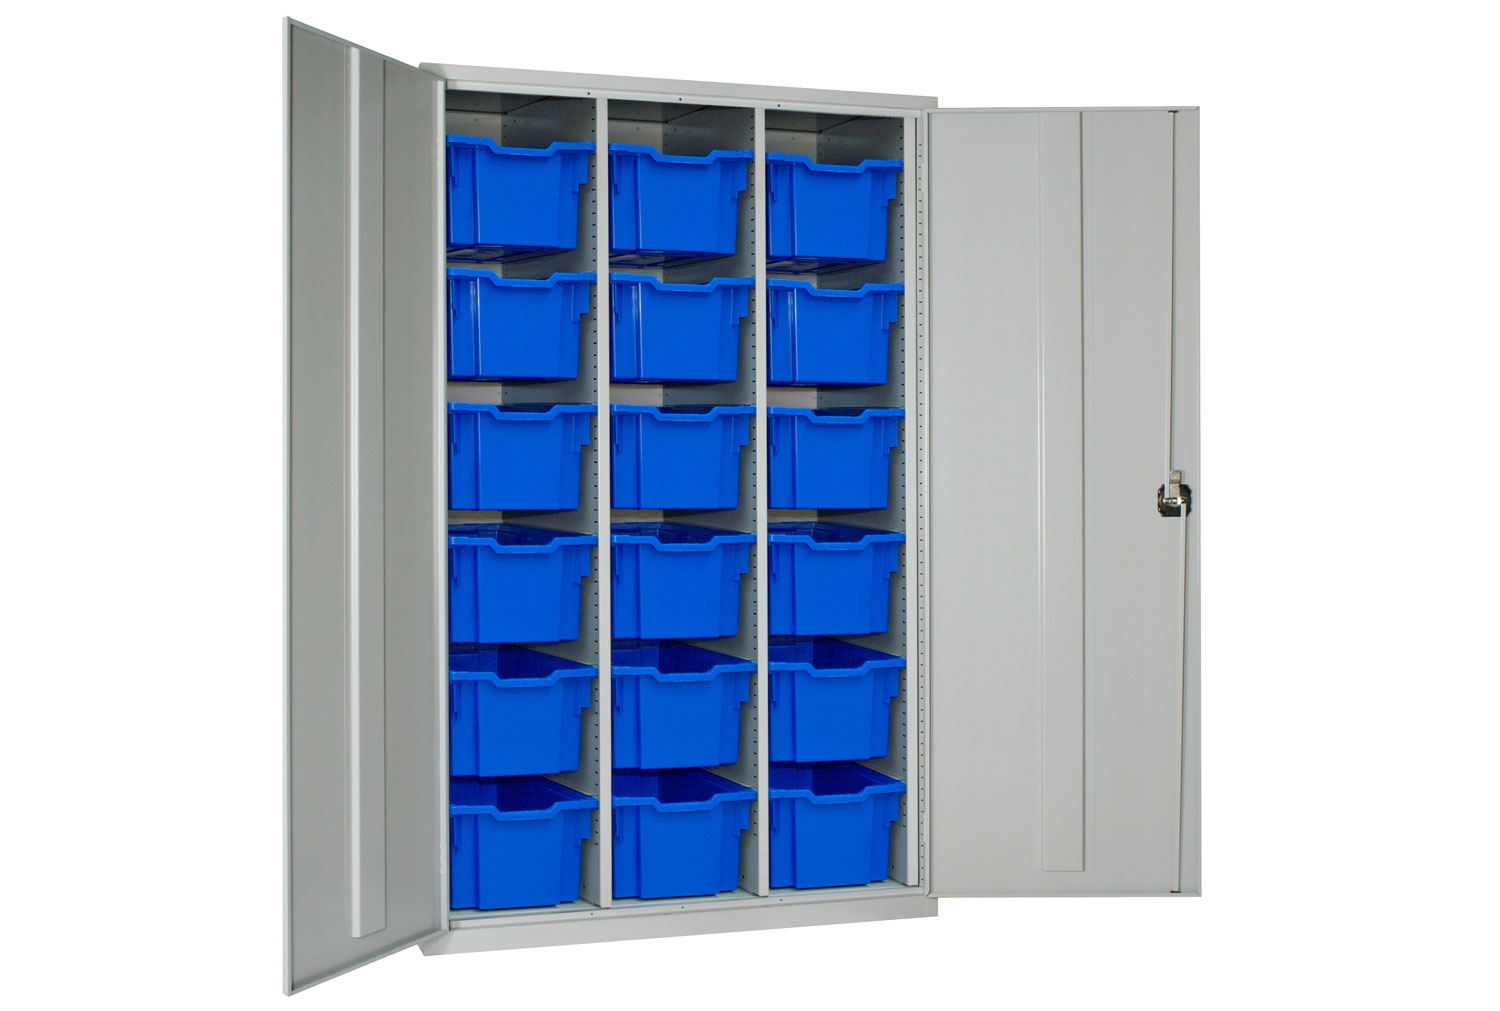 Elite High Capacity Storage Office Cupboards With 18 Extra Deep Trays, Black With Translucent Trays